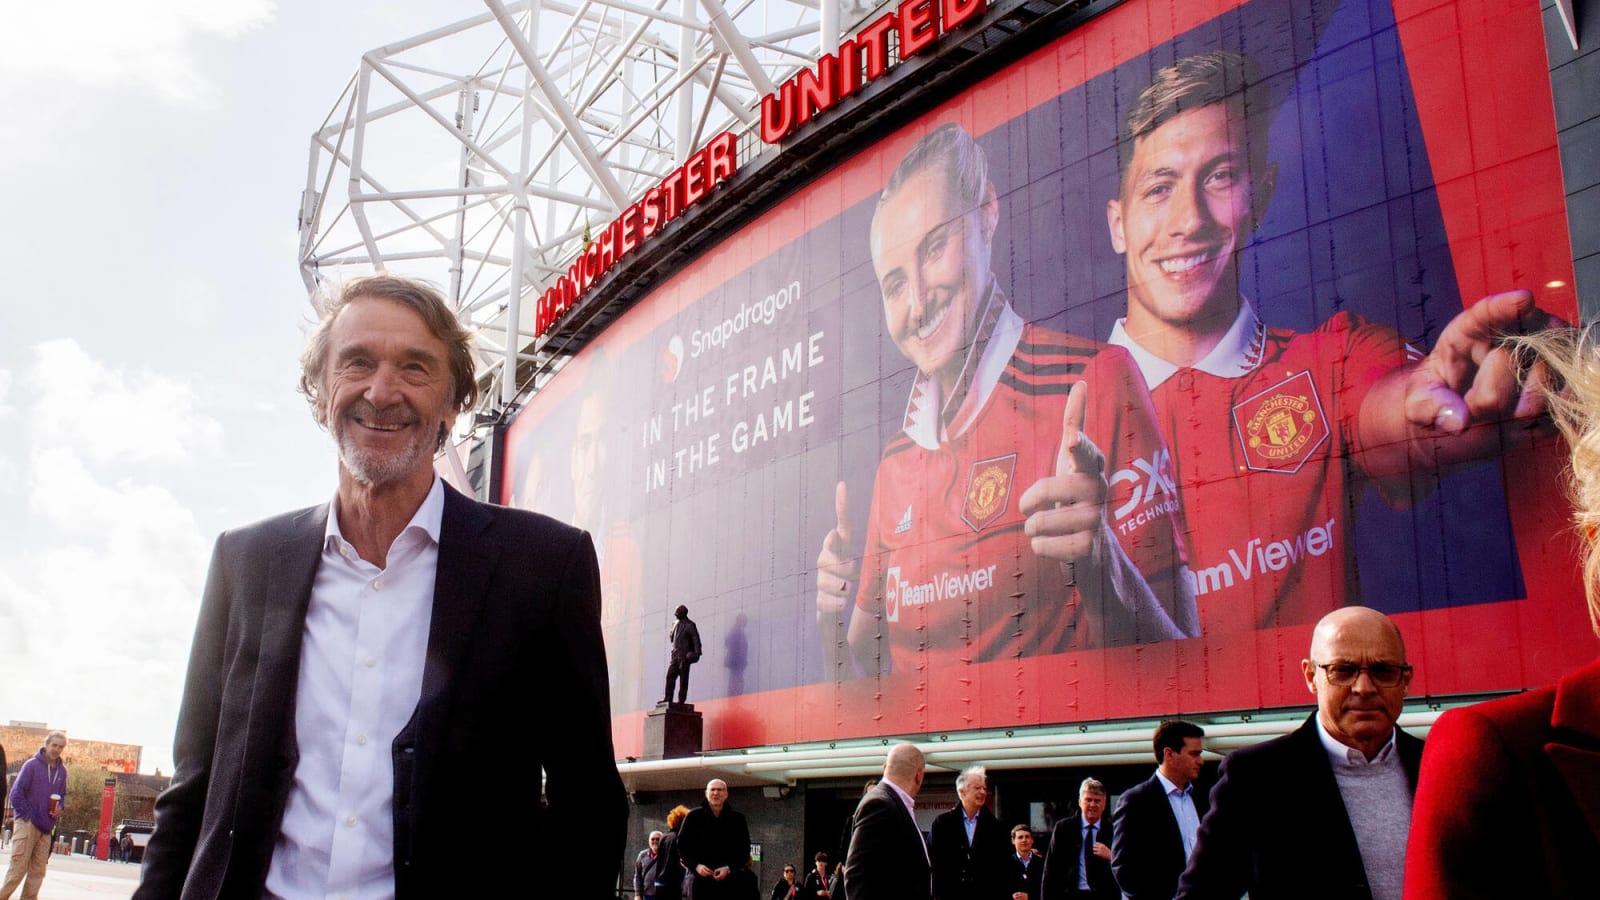 ‘Never know what you get’ – Ryan Giggs sends message to Sir Jim Ratcliffe